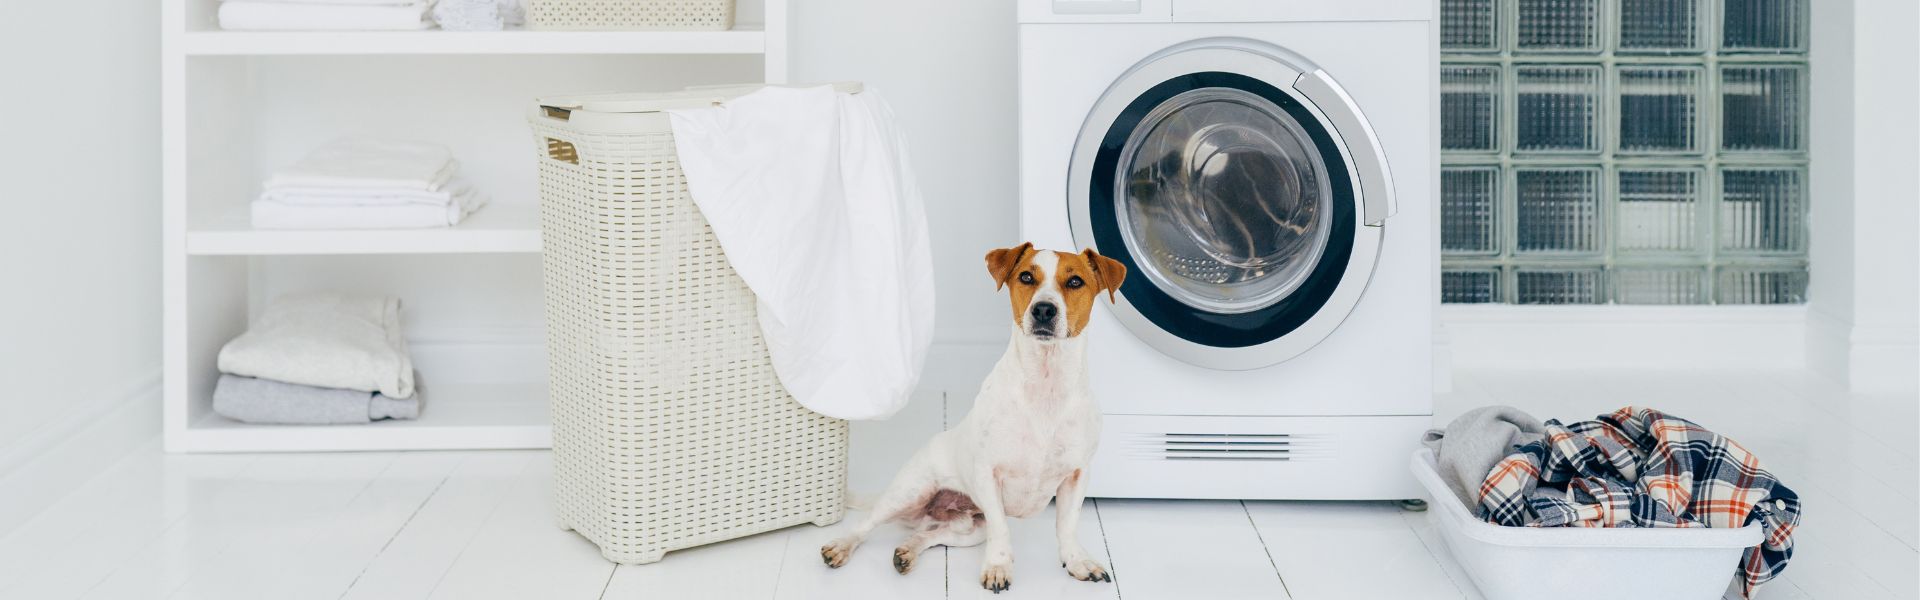 Pet-safe laundry detergent: A laundry list of chemicals to avoid